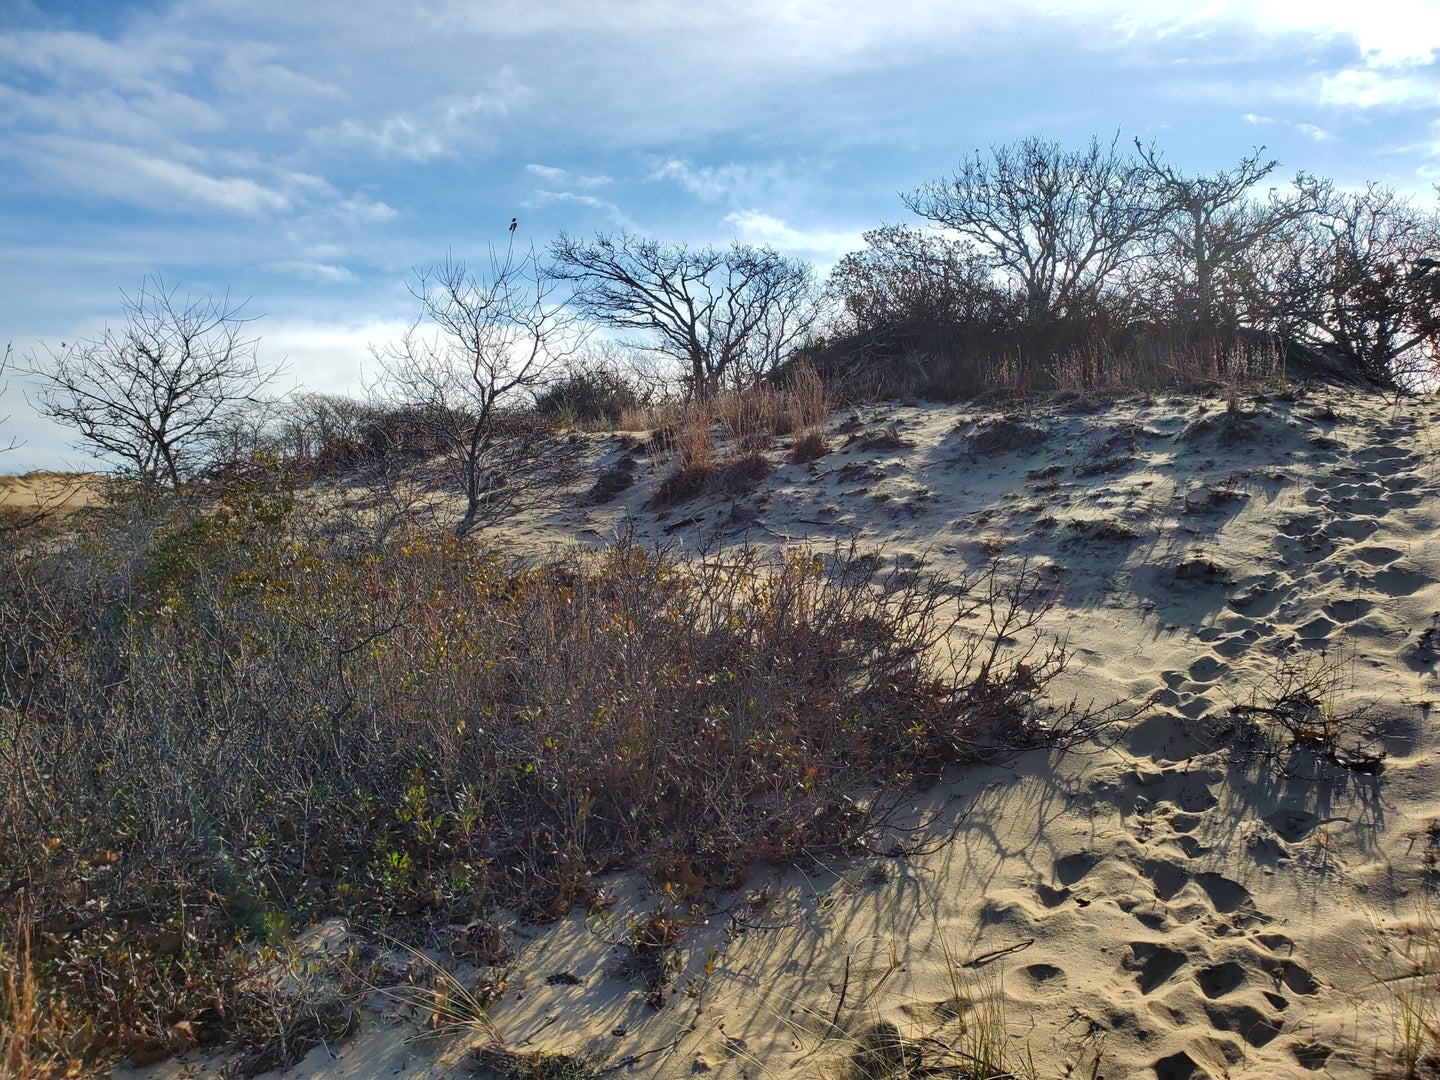 sand dunes and trees at hither hills state park on long island